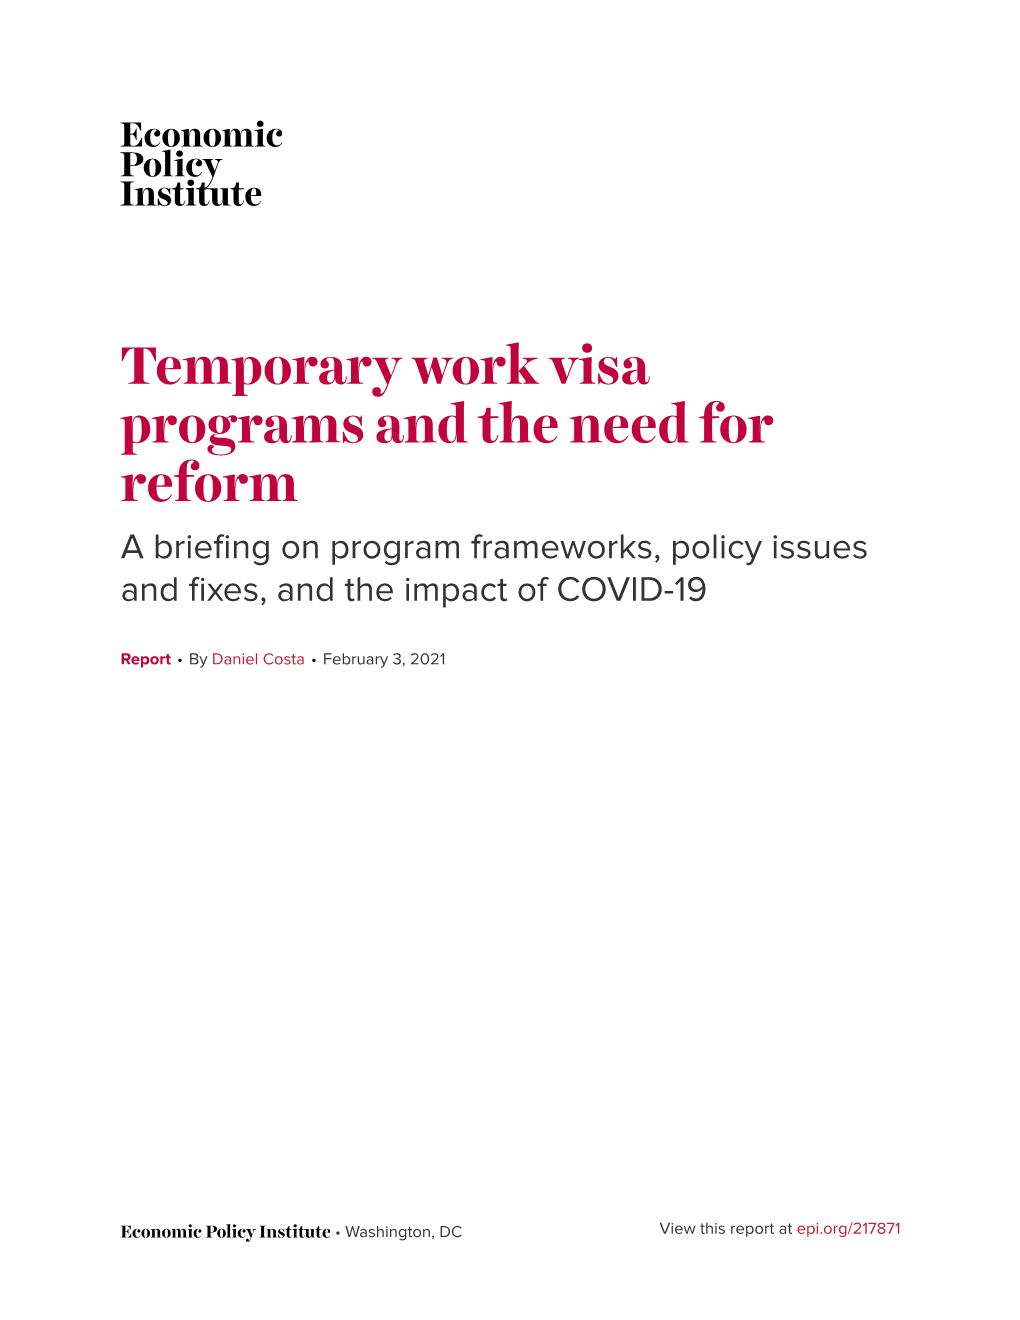 Temporary Work Visa Programs and the Need for Reform a Briefing on Program Frameworks, Policy Issues and Fixes, and the Impact of COVID-19